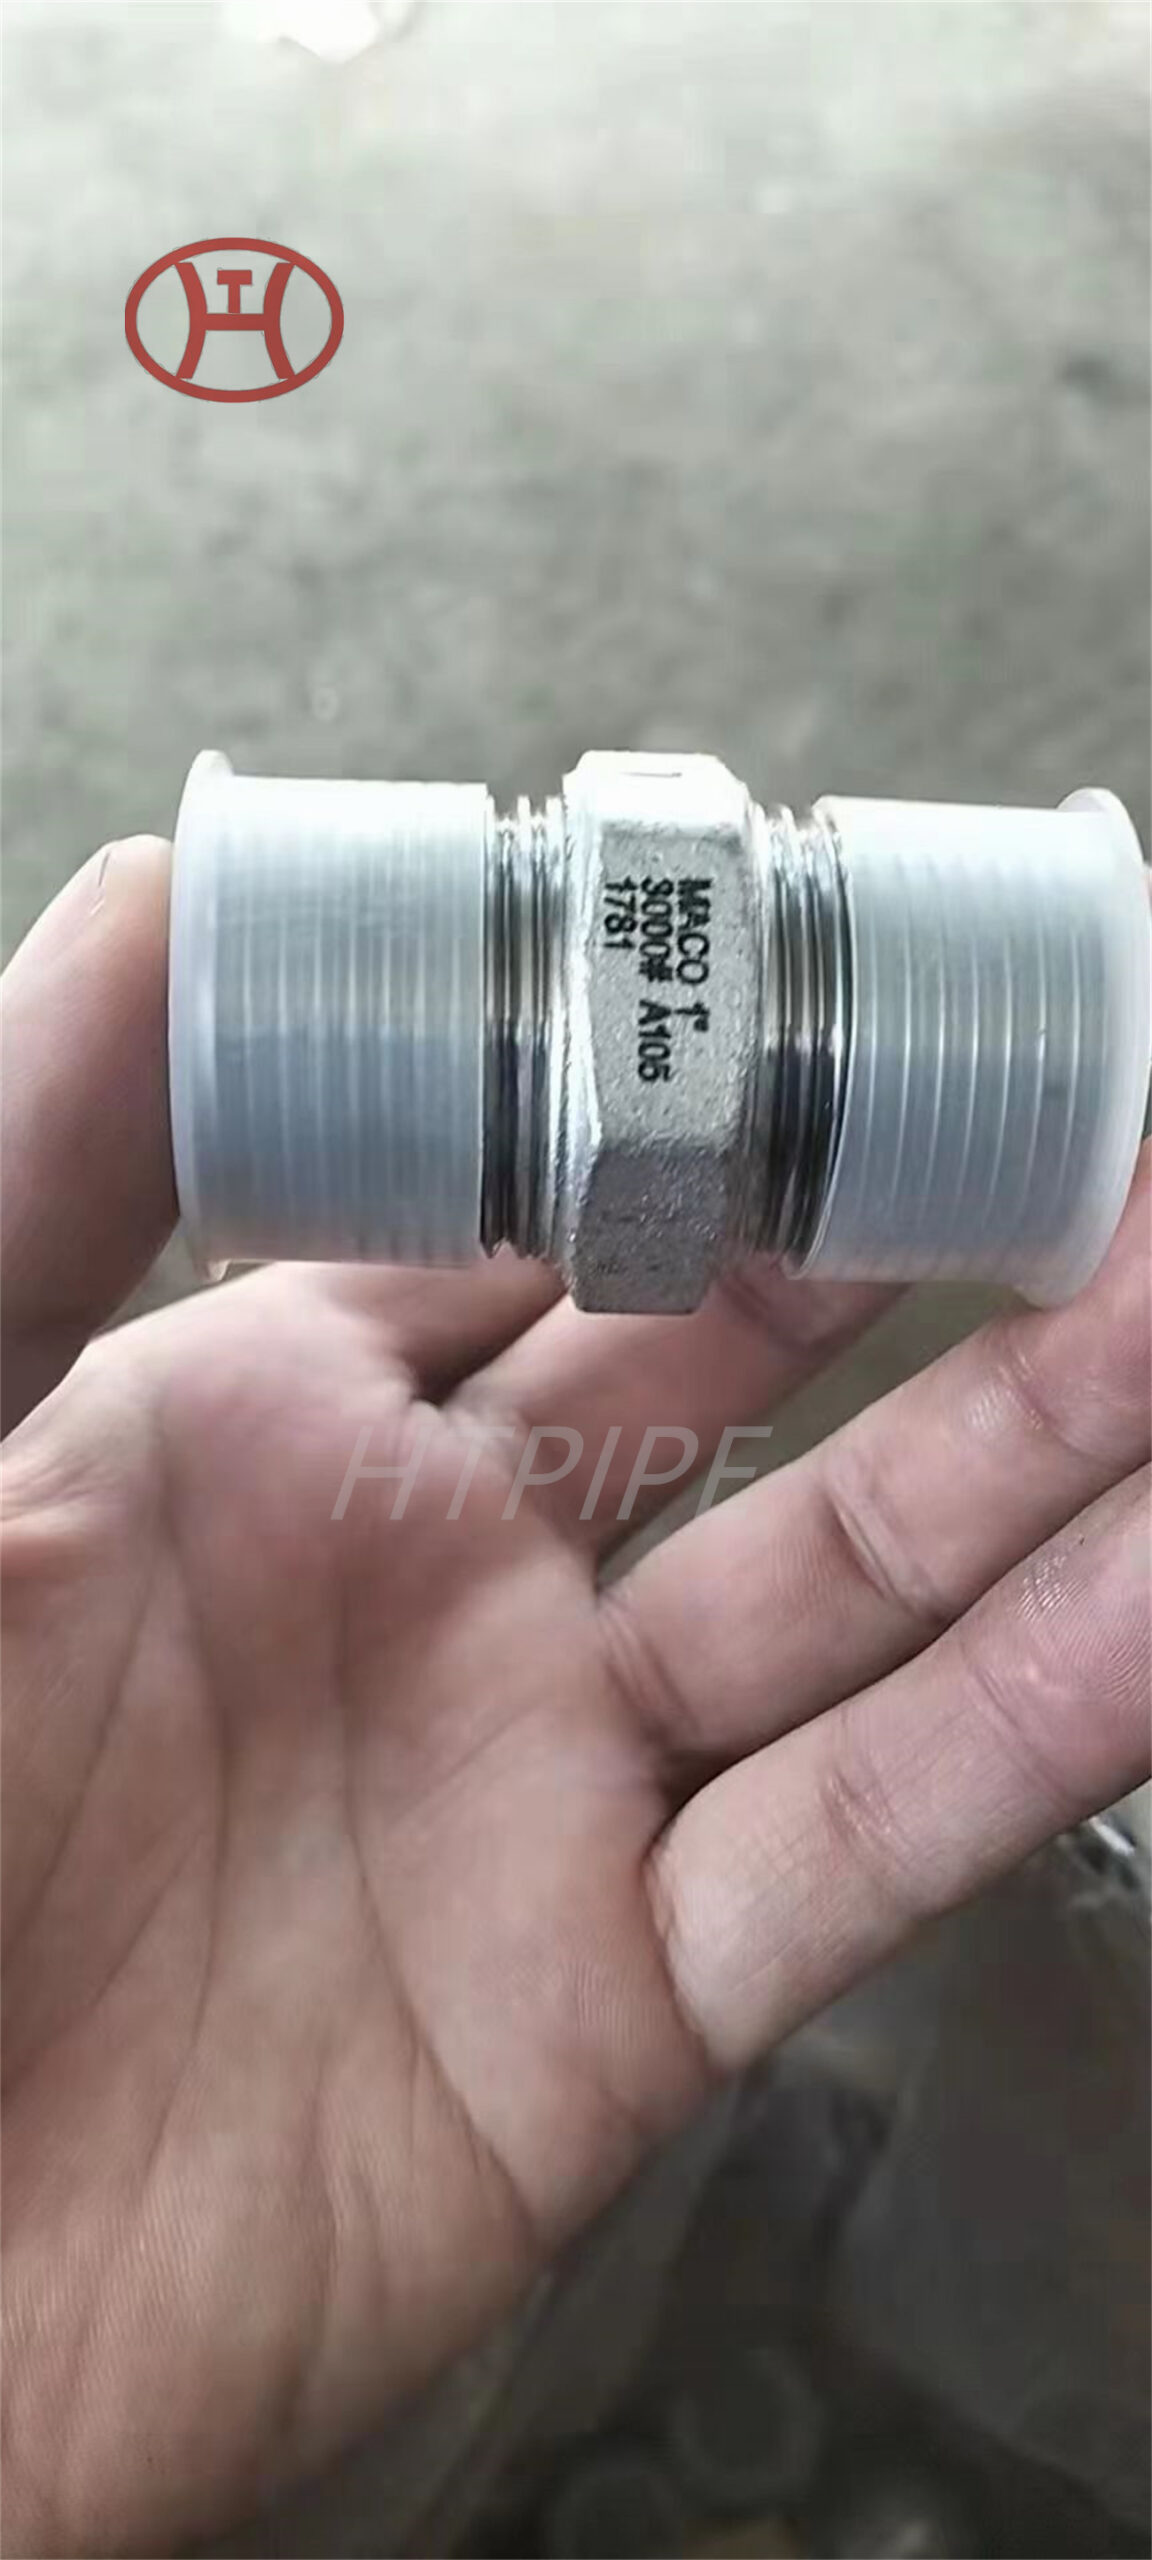 A182 F5 F9 F11 forged fittings Yield Strength Elongation